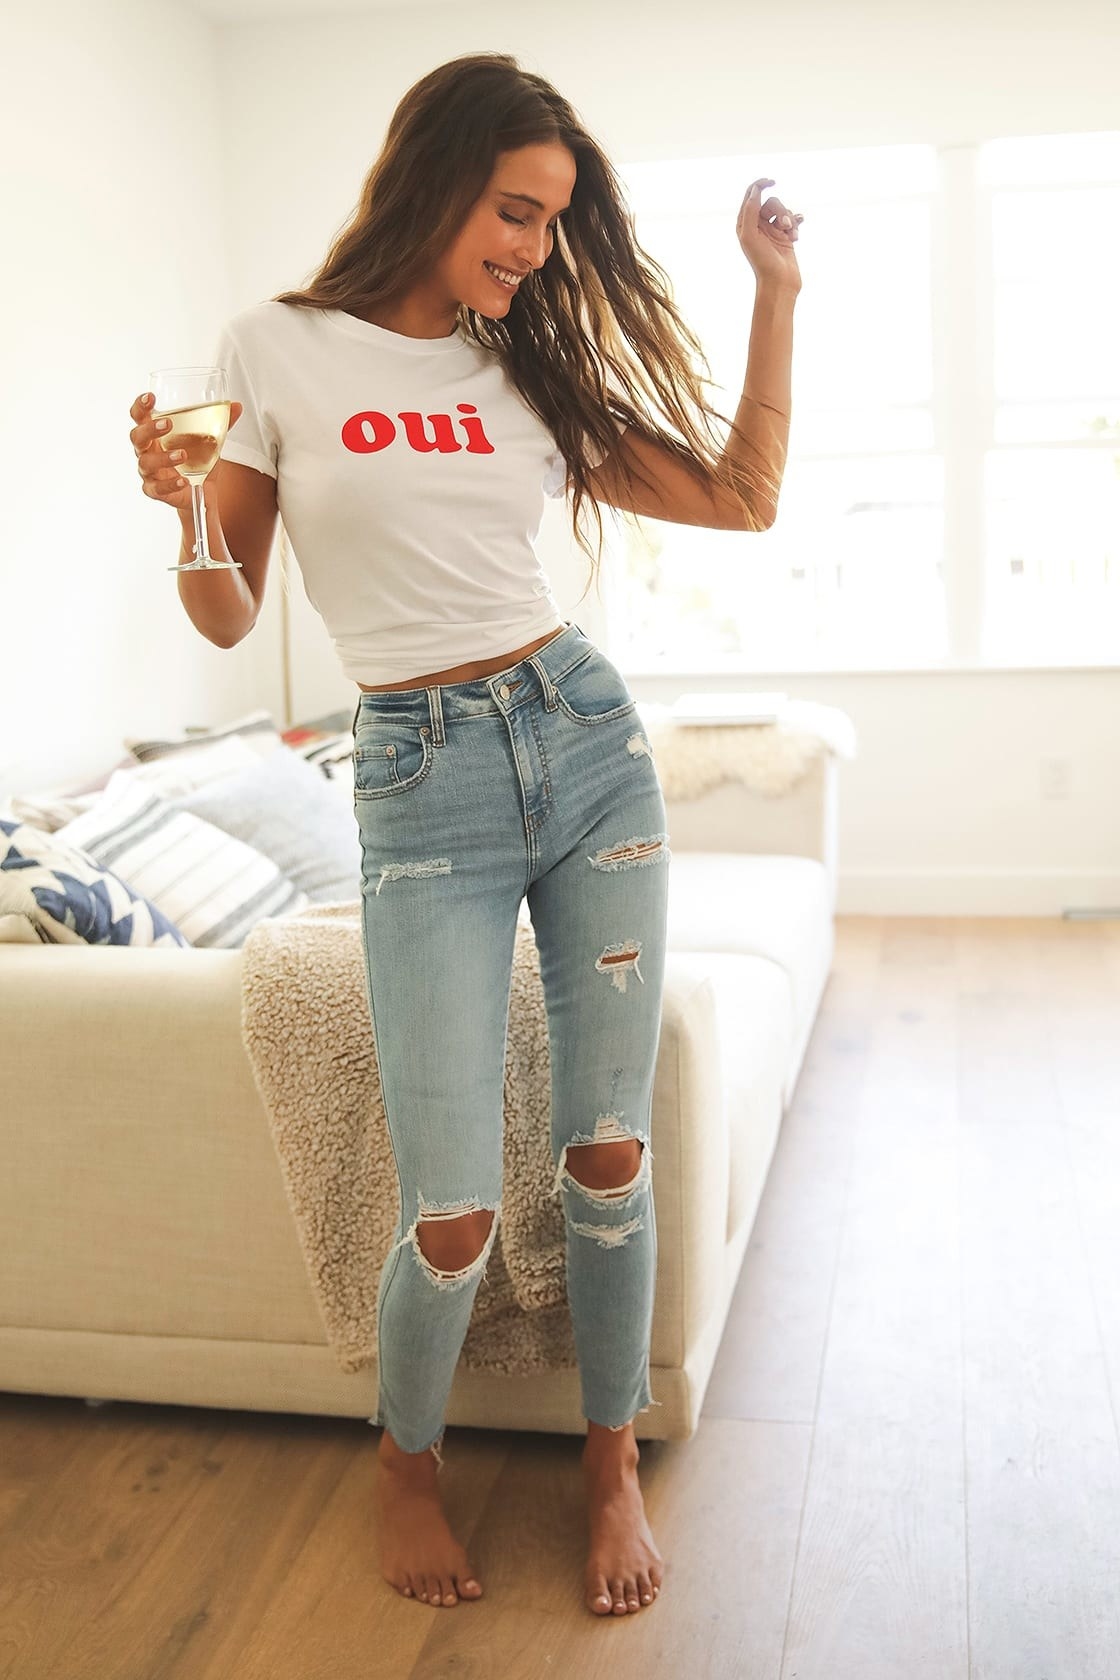 Model is wearing a white T-shirt and light distressed skinny jeans